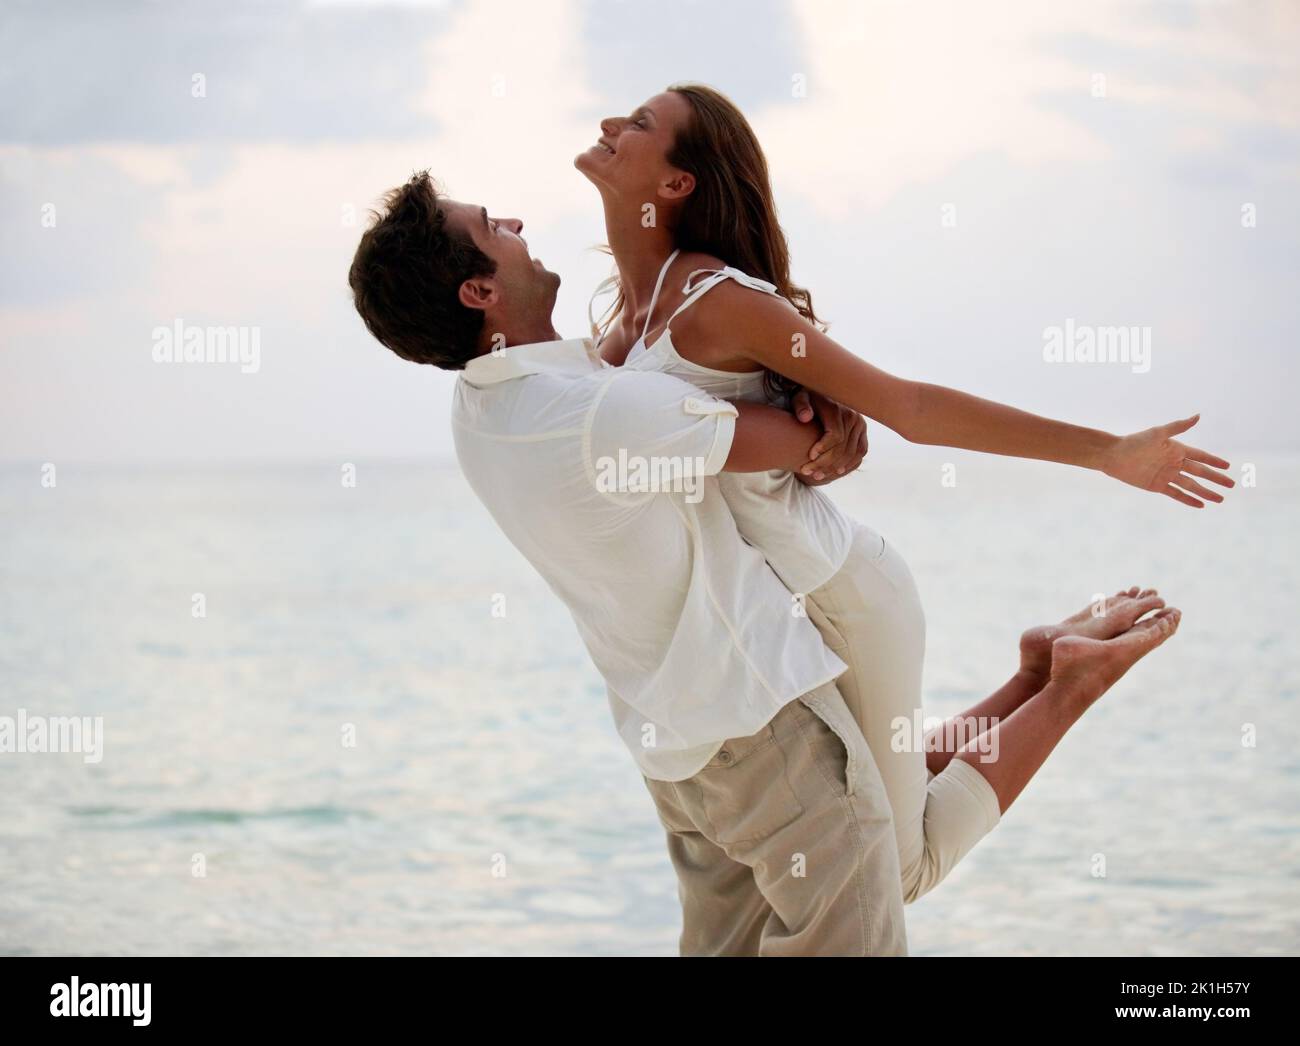 Unrestrained happiness. A young beauty feeling light and free as her boyfriend lifts her into the air on the beach. Stock Photo